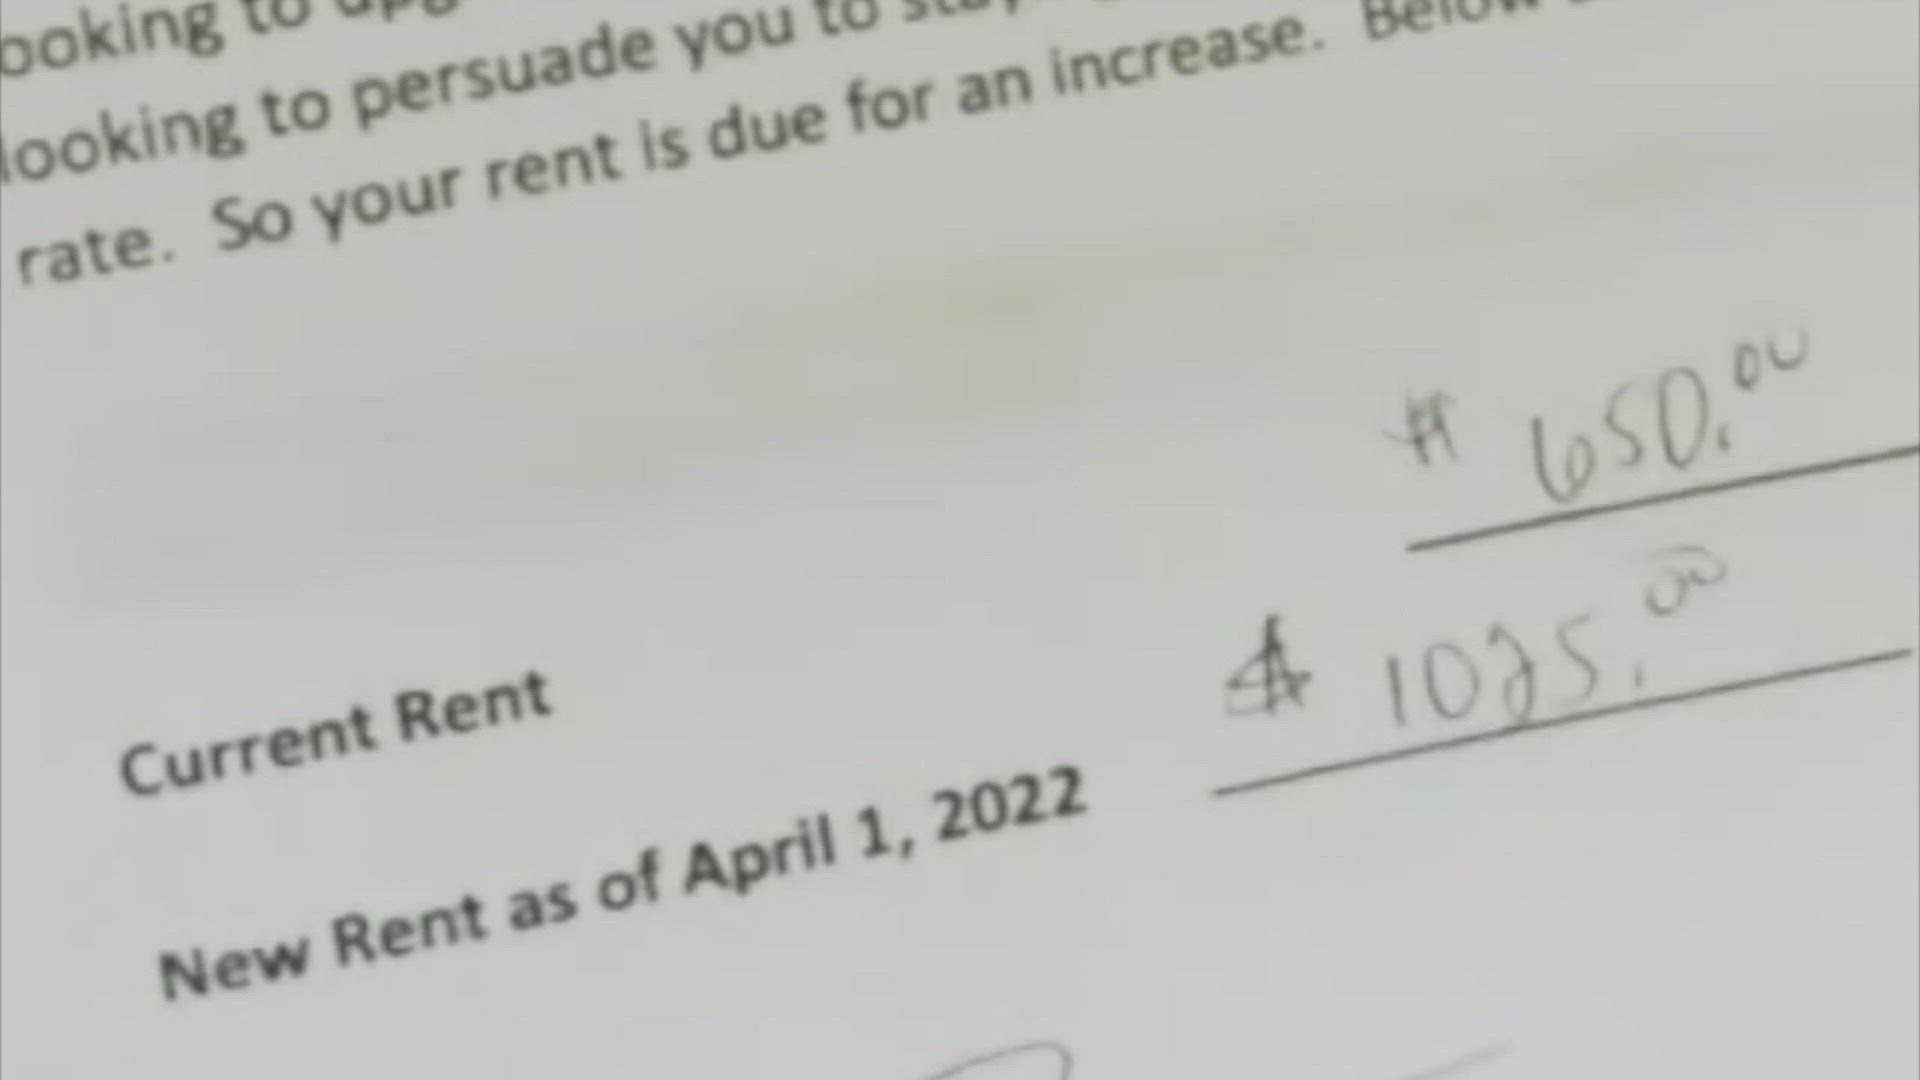 Rents are going up for apartment dwellers across the country, and now many landlords are raising rents to "market rate."